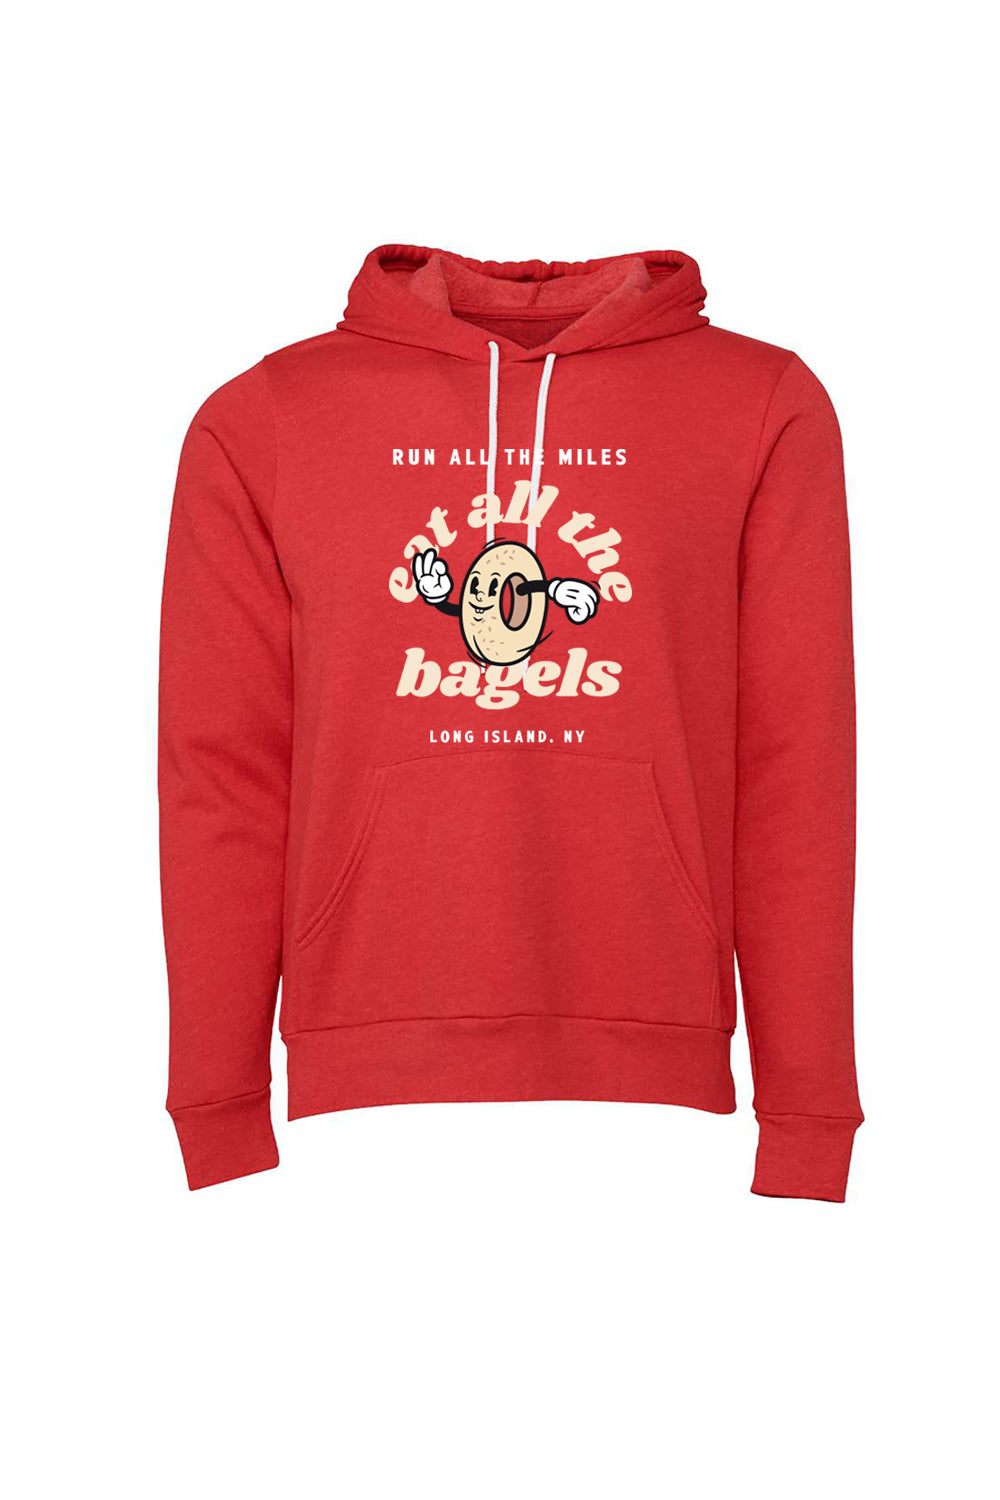 Run All The Miles, Eat All The Bagels Hoodie